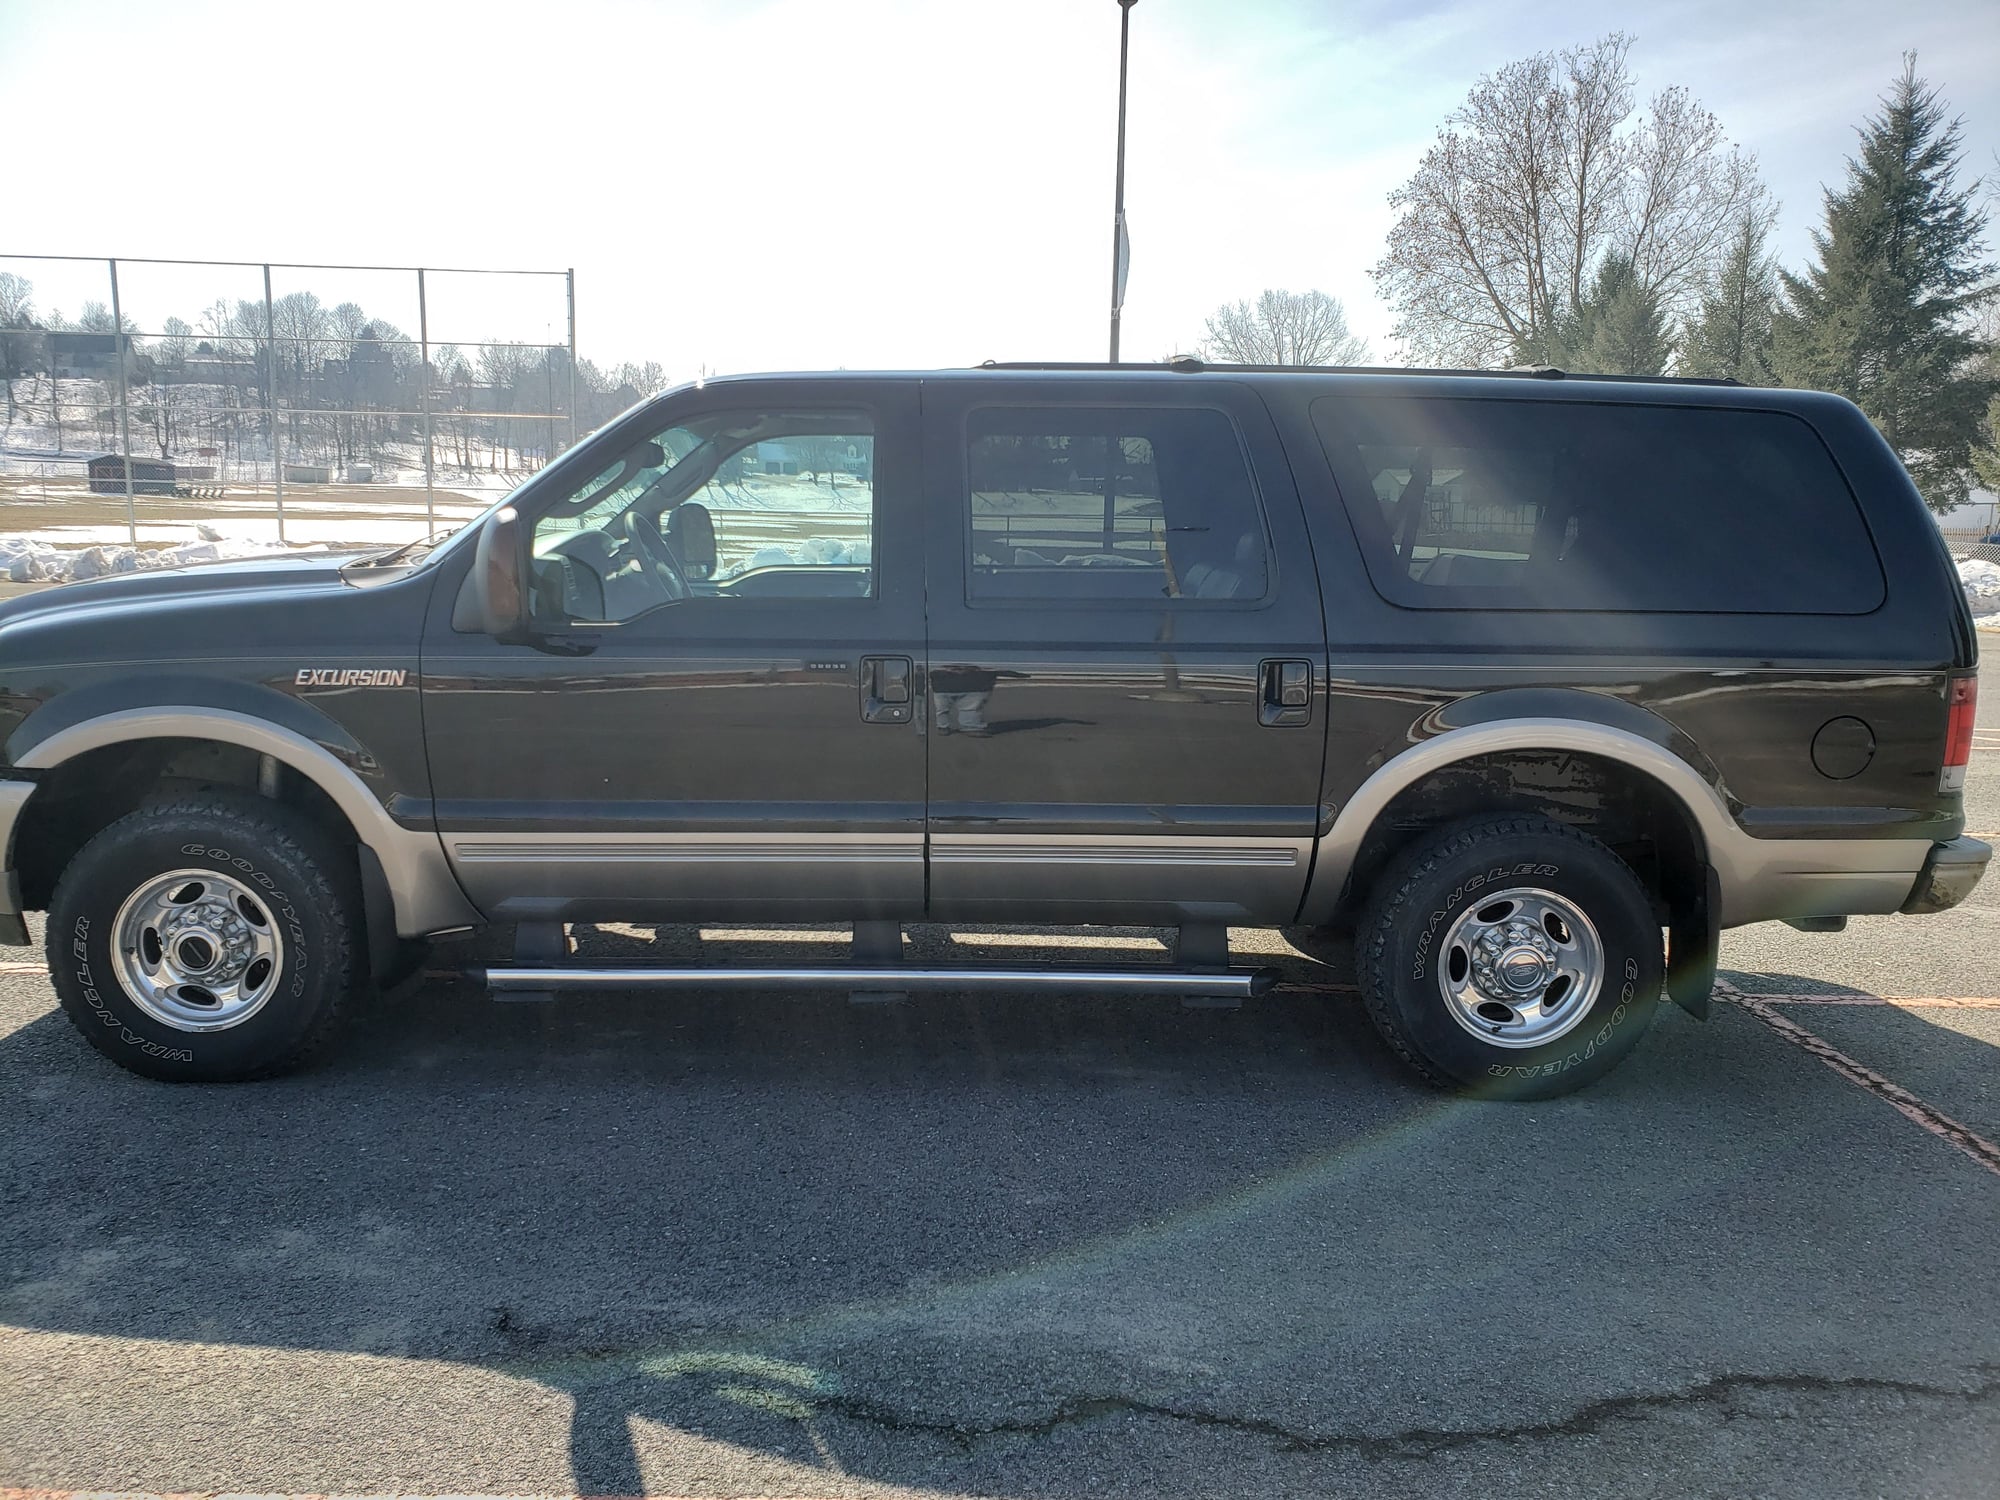 2004 Ford Excursion - Central PA Excursion for sale - Used - VIN 1fmsu45p54ed59200 - 280,000 Miles - 8 cyl - 4WD - Automatic - SUV - Black - Lewisburg, PA 17837, United States